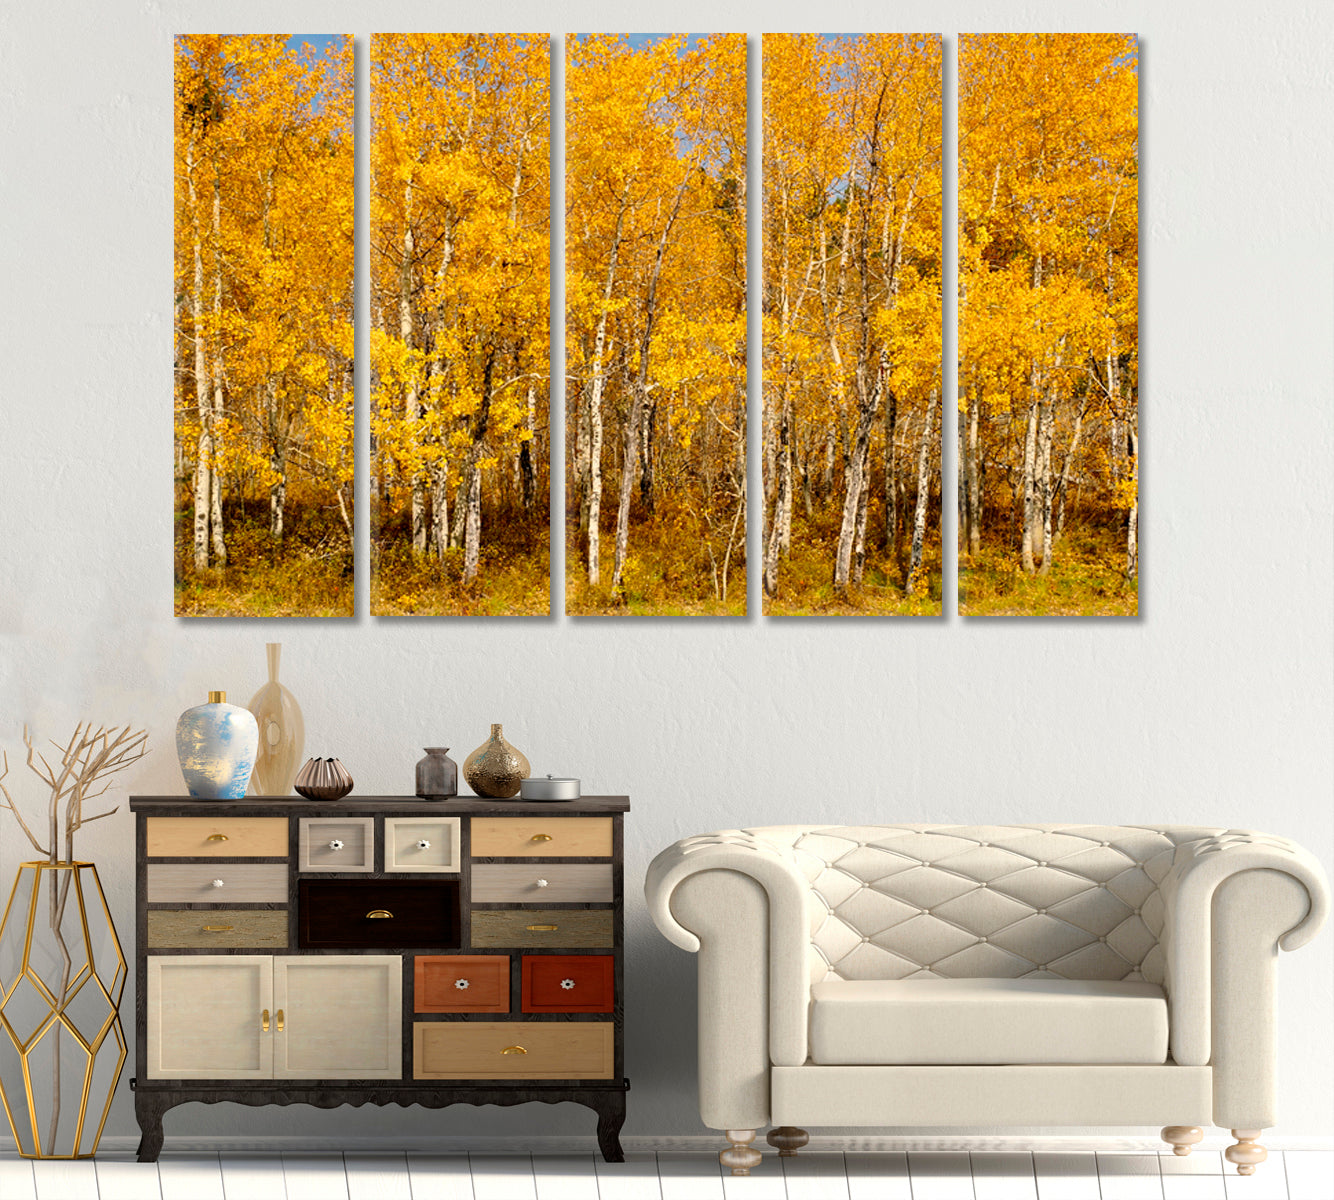 BEAUTIFUL AUTUMN Colorful Stands Of Aspen Trees Nature Wall Canvas Print Artesty 5 panels 36" x 24" 